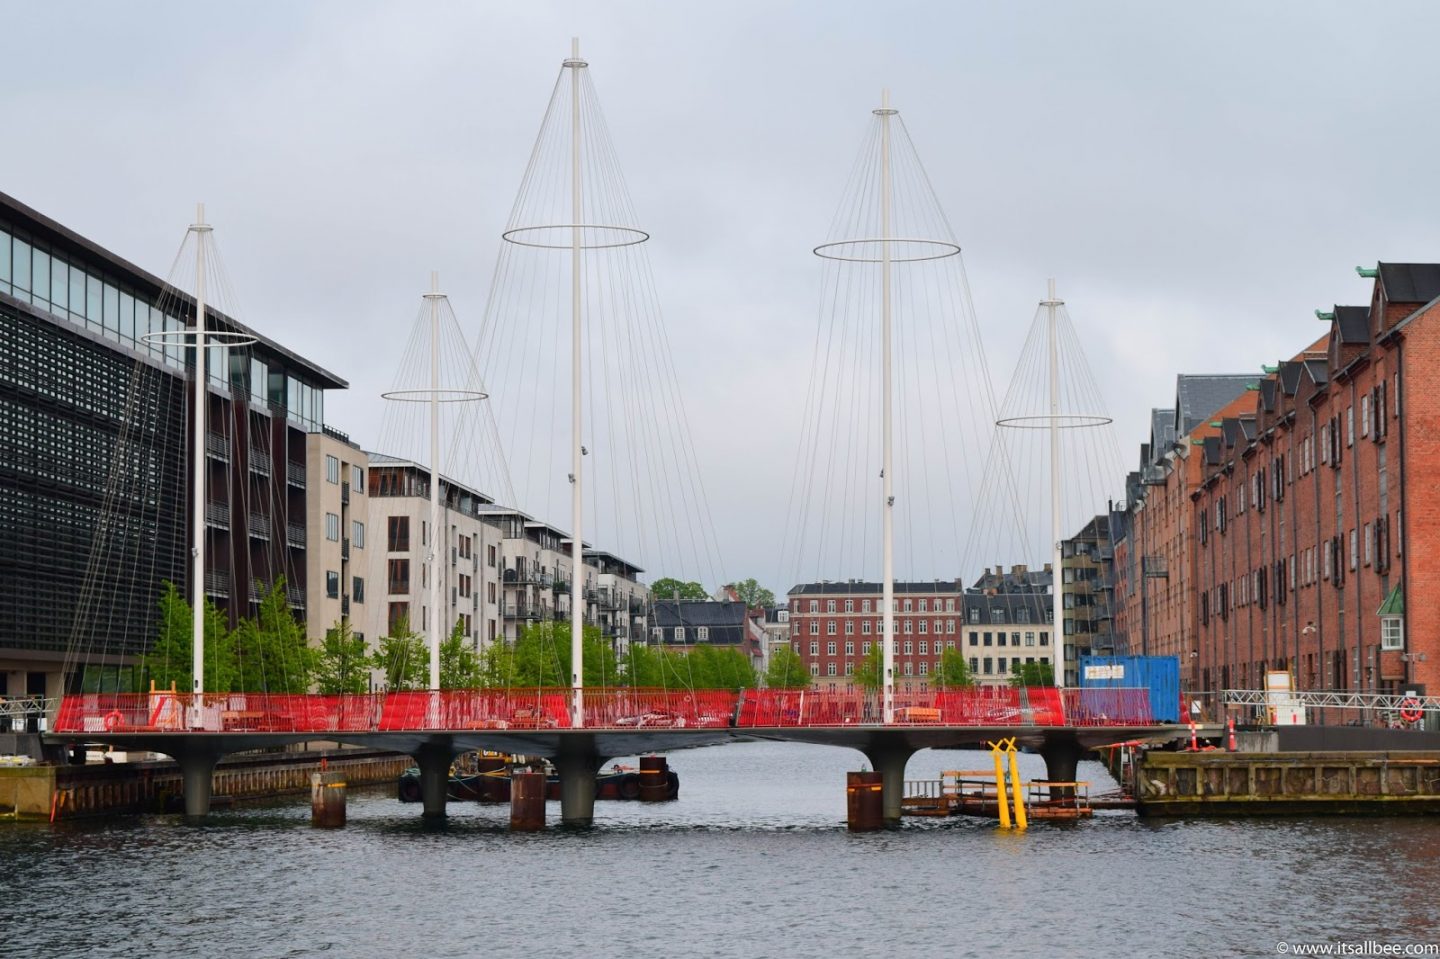 Things to see and do in Copenhagen